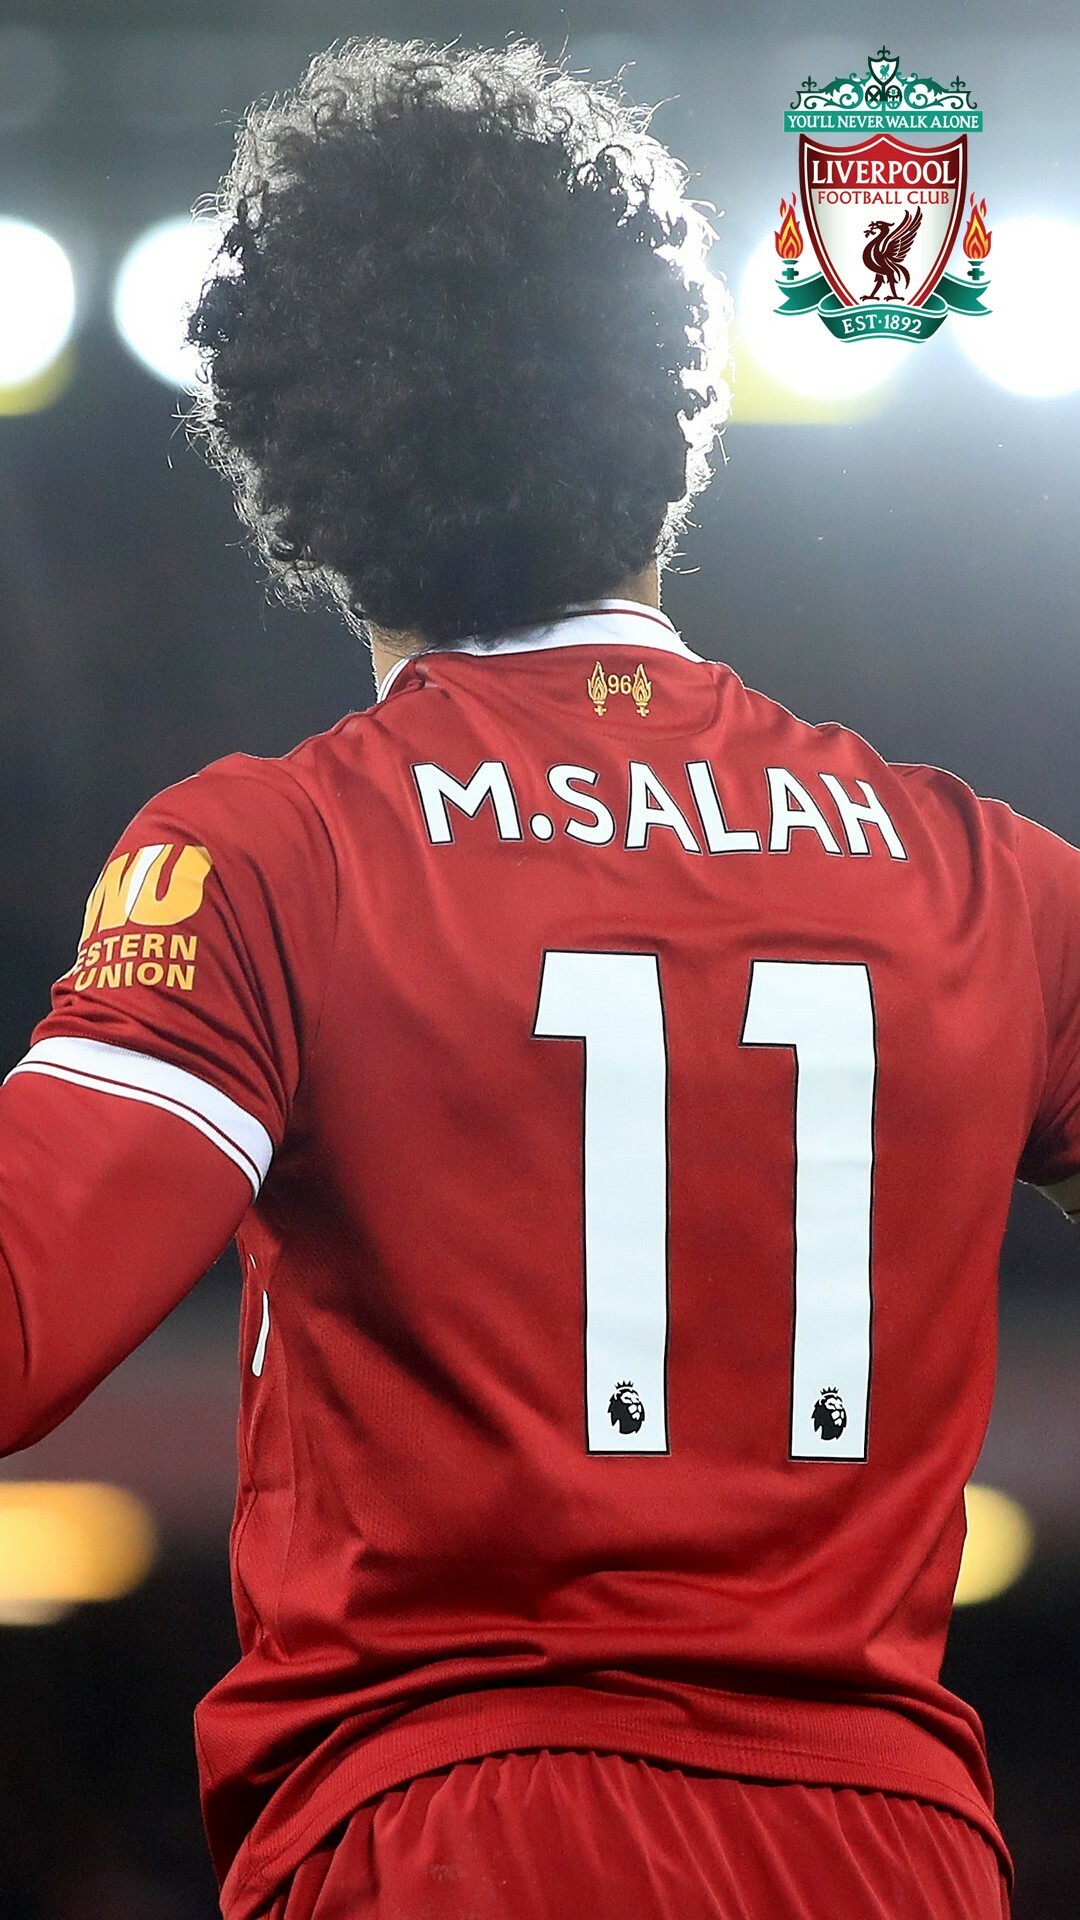 Mohamed Salah: In October 2020, he scored his 100th Premier League goal for the Reds, becoming the fastest player to do so in club history in the top flight. 1080x1920 Full HD Wallpaper.